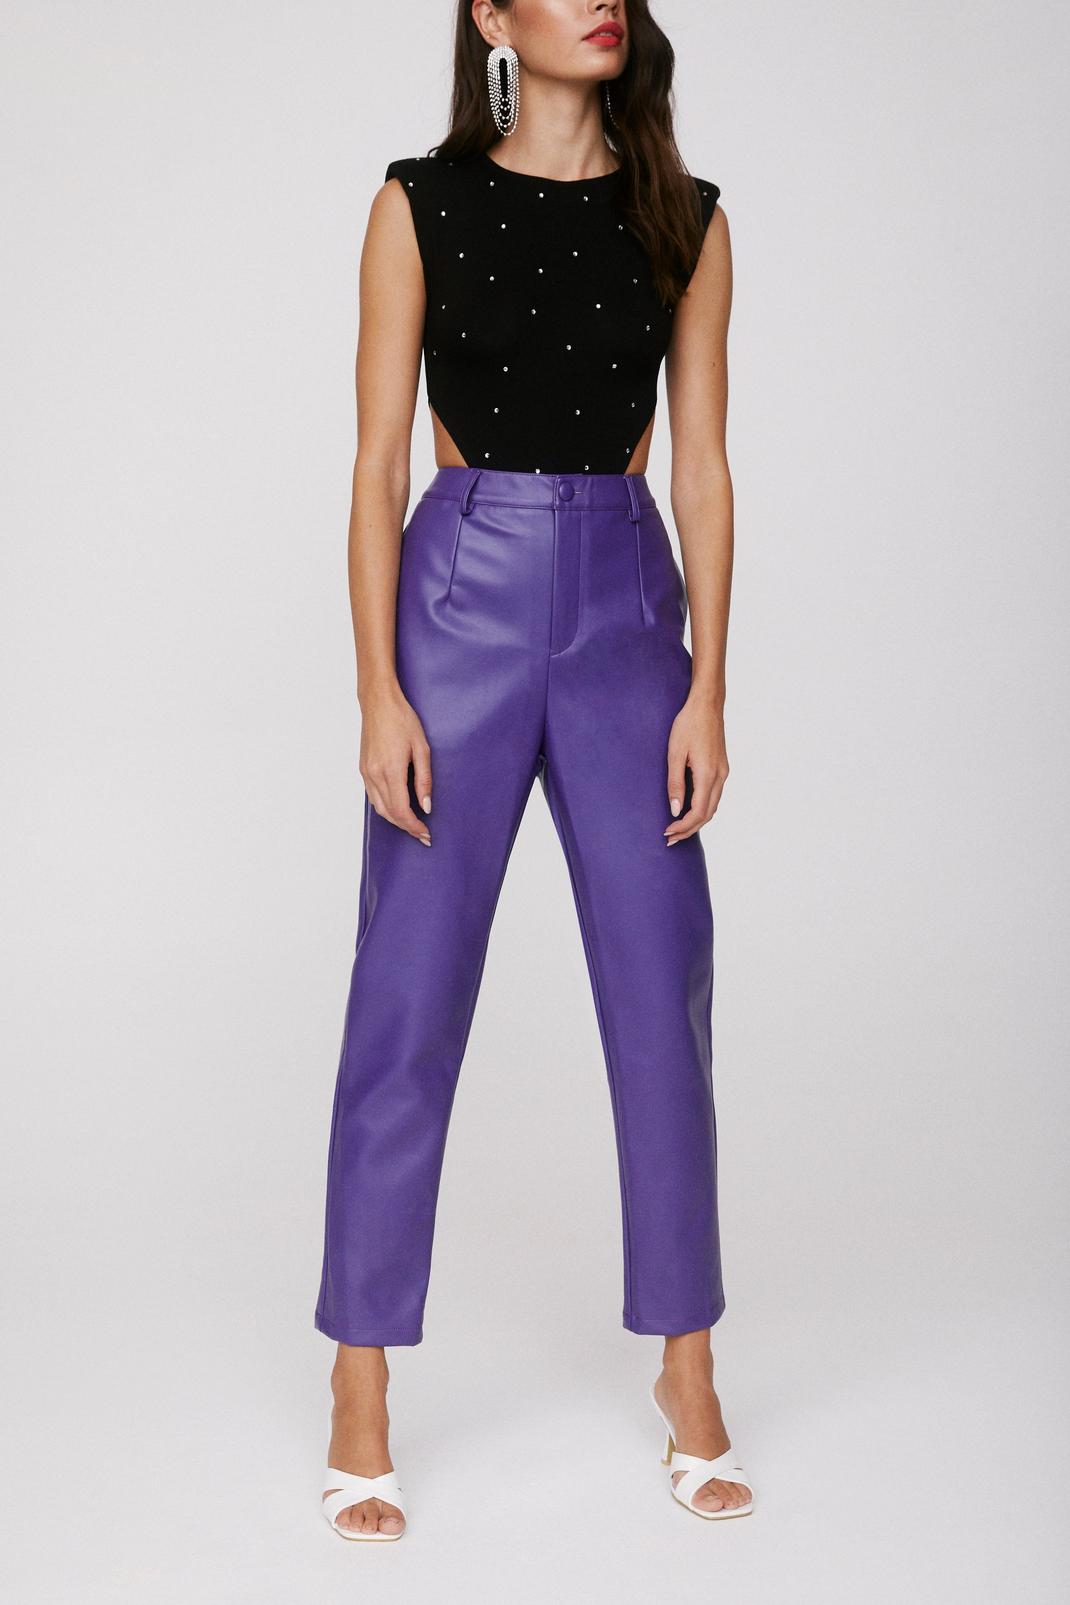 Lead Faux Leather Pants Nasty Gal, Purple Faux Leather